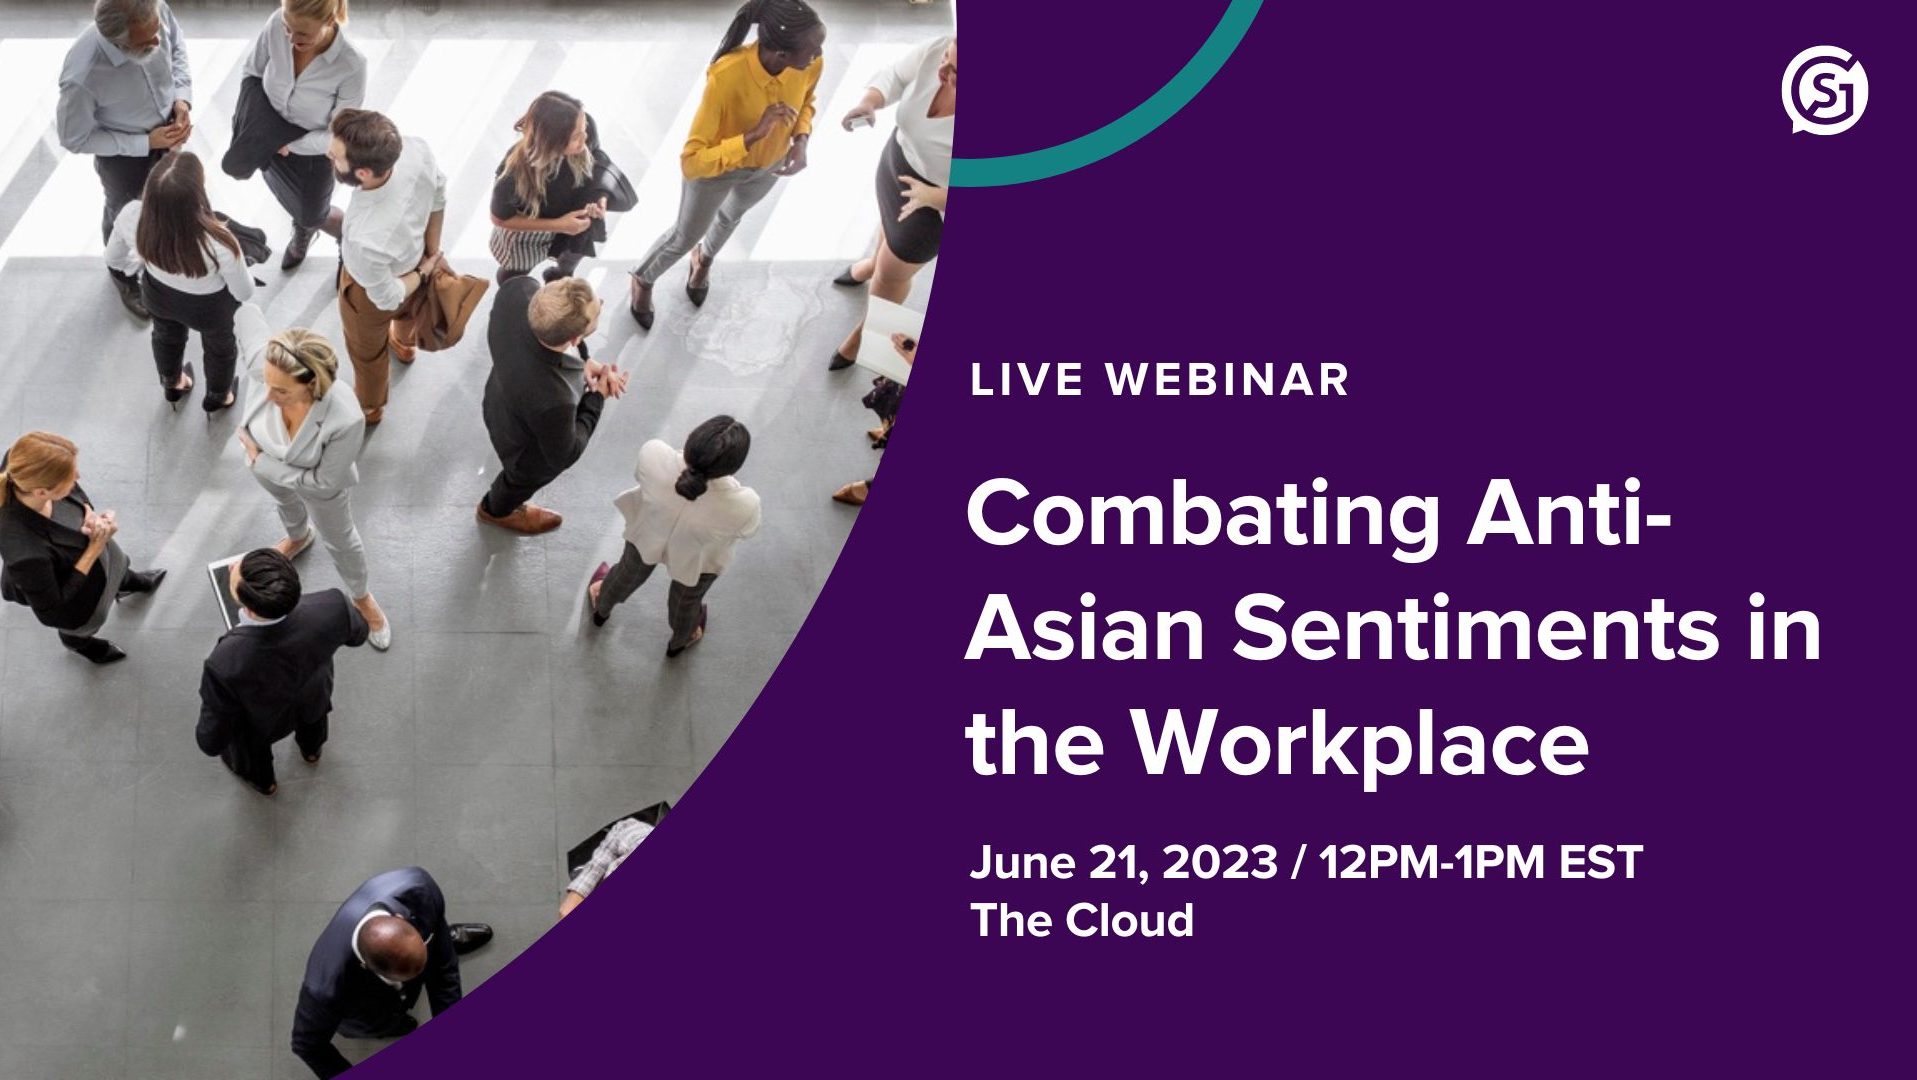 Webinar: Combating Anti-Asian Sentiments in the Workplace